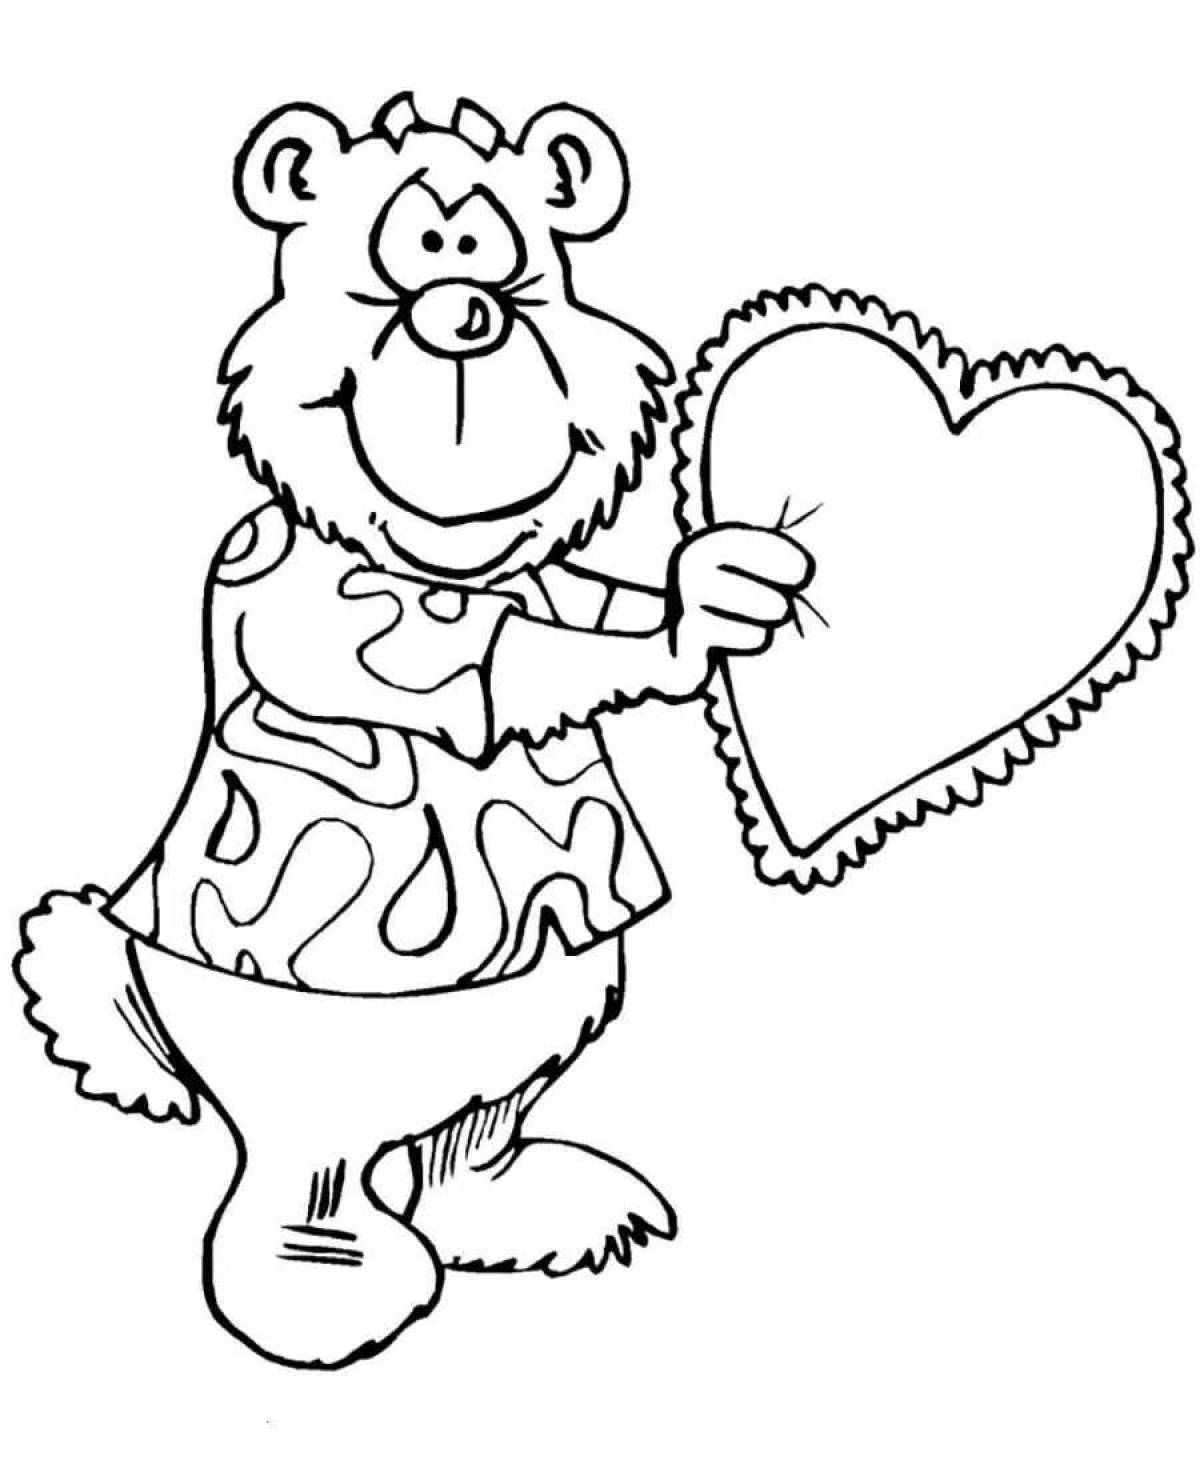 Sweet valentine's day coloring book